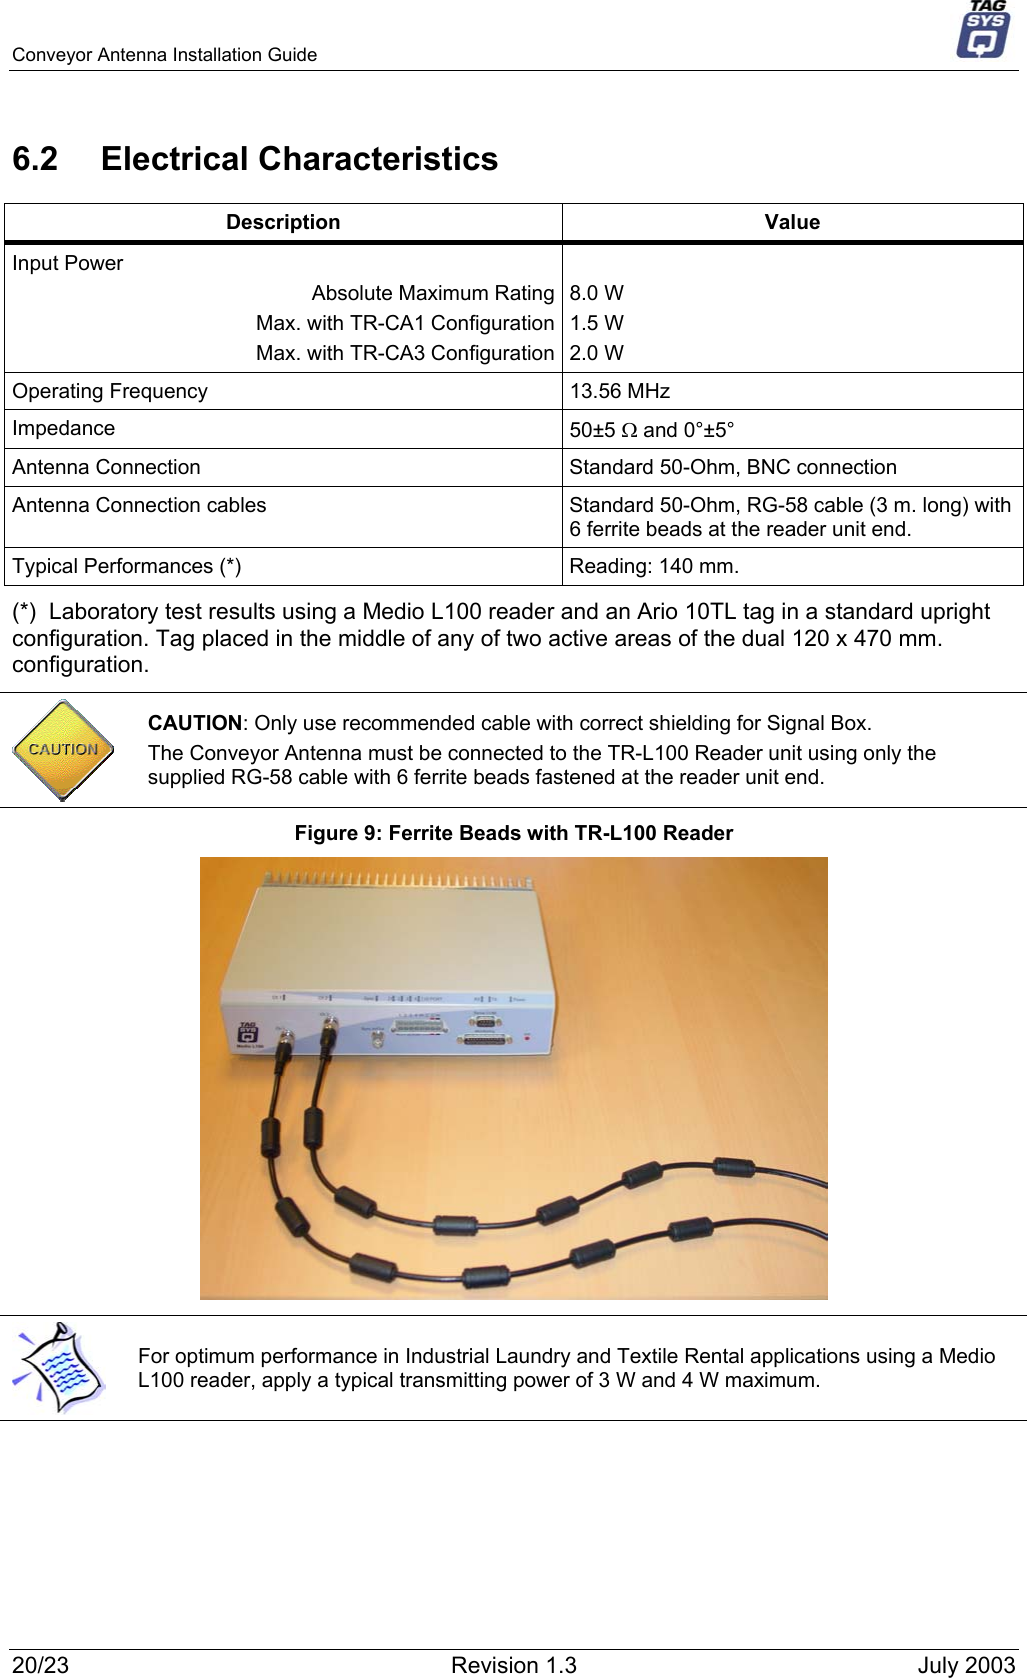 Conveyor Antenna Installation Guide     6.2 Electrical Characteristics Description Value Input Power Absolute Maximum Rating Max. with TR-CA1 Configuration Max. with TR-CA3 Configuration  8.0 W  1.5 W 2.0 W Operating Frequency  13.56 MHz Impedance  50±5 Ω and 0°±5°  Antenna Connection  Standard 50-Ohm, BNC connection Antenna Connection cables  Standard 50-Ohm, RG-58 cable (3 m. long) with 6 ferrite beads at the reader unit end.  Typical Performances (*)  Reading: 140 mm. (*)  Laboratory test results using a Medio L100 reader and an Ario 10TL tag in a standard upright configuration. Tag placed in the middle of any of two active areas of the dual 120 x 470 mm. configuration.  CAUTION: Only use recommended cable with correct shielding for Signal Box.  The Conveyor Antenna must be connected to the TR-L100 Reader unit using only the supplied RG-58 cable with 6 ferrite beads fastened at the reader unit end. Figure 9: Ferrite Beads with TR-L100 Reader   For optimum performance in Industrial Laundry and Textile Rental applications using a Medio L100 reader, apply a typical transmitting power of 3 W and 4 W maximum.   20/23  Revision 1.3  July 2003 